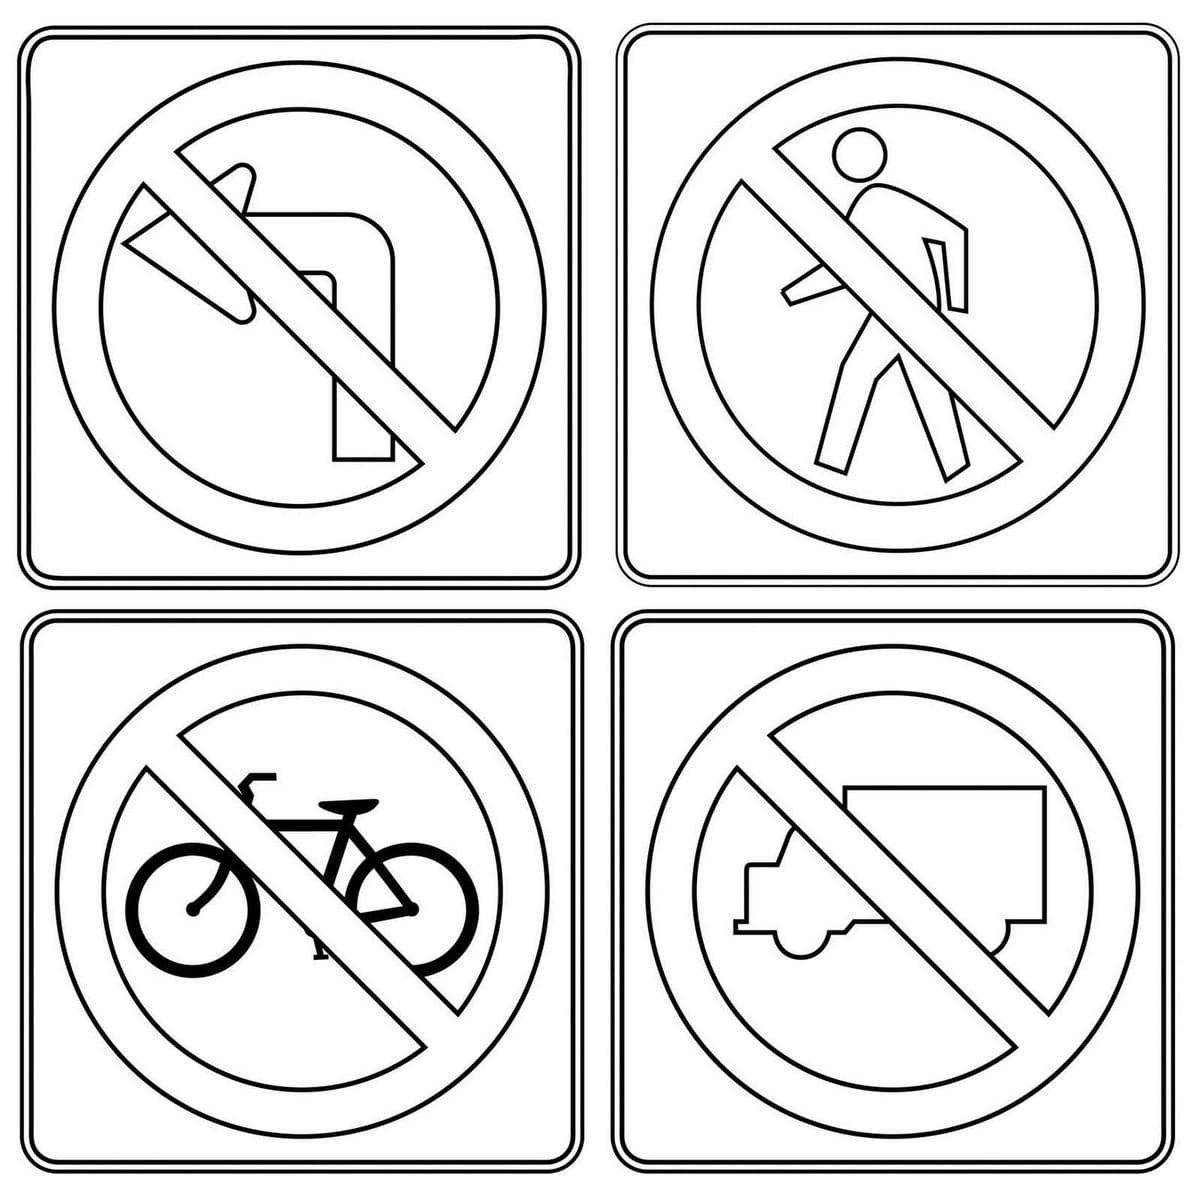 Radiant coloring page rules of the road traffic signs